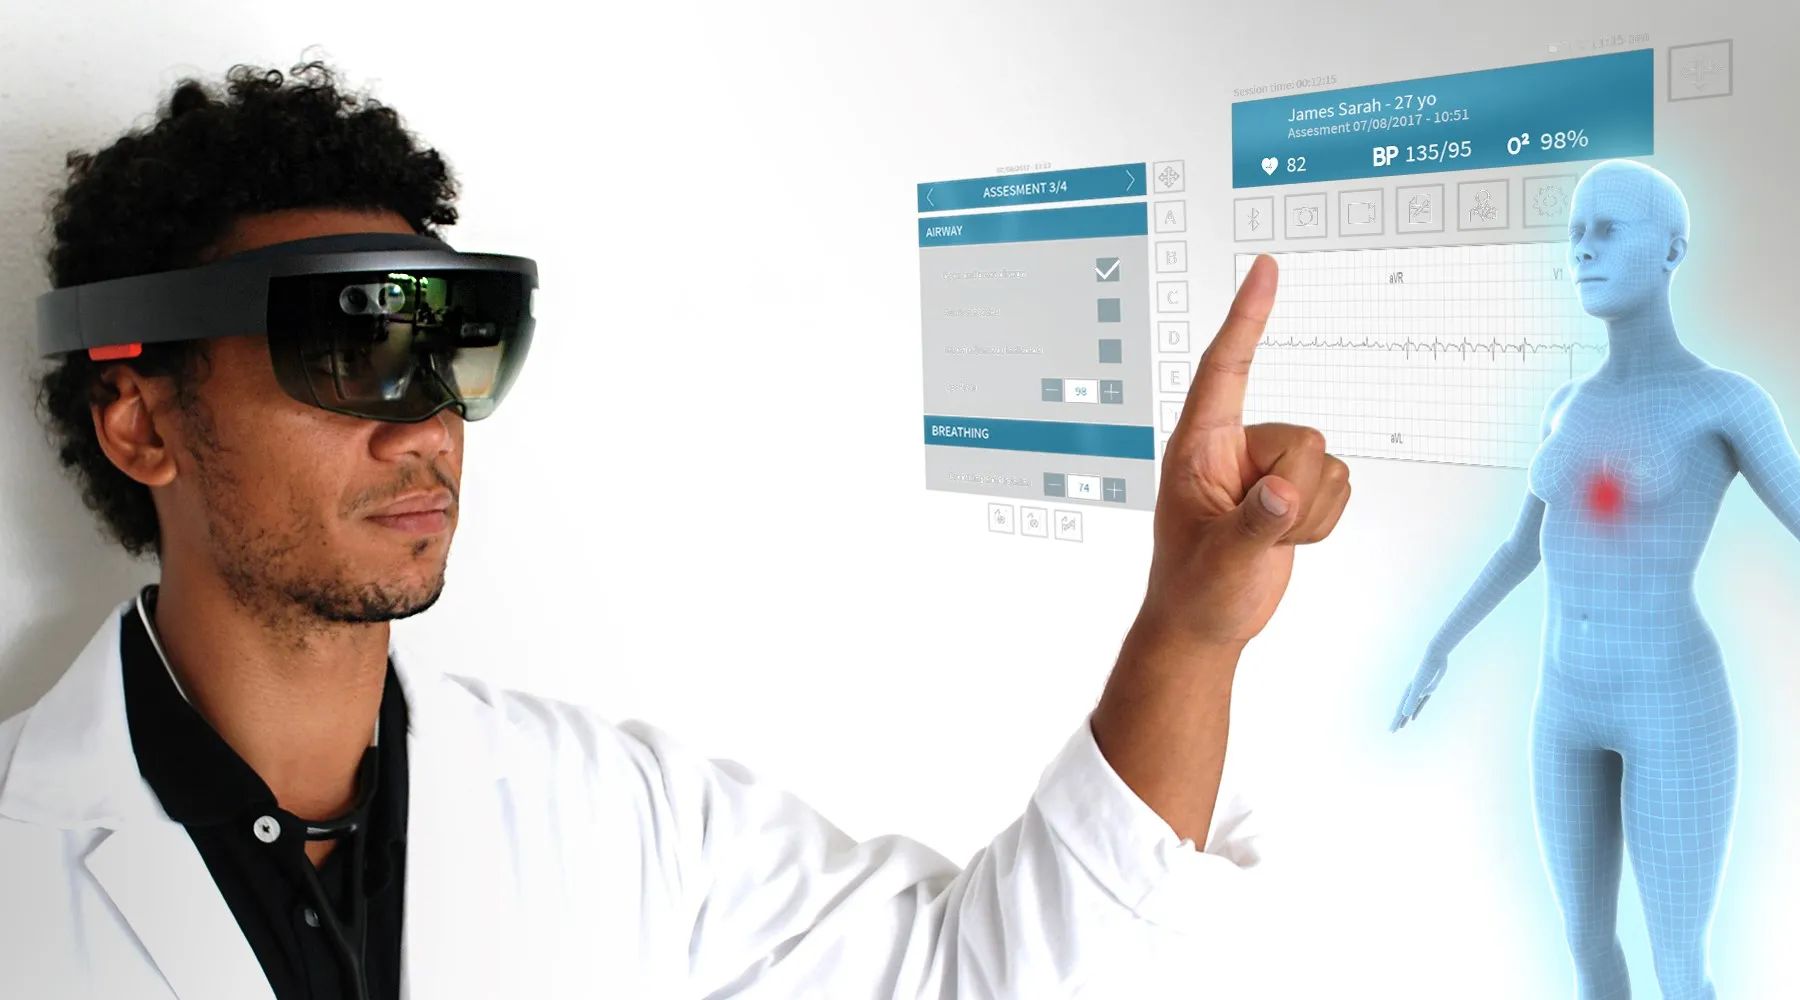 How To Add Medical Images To HoloLens App